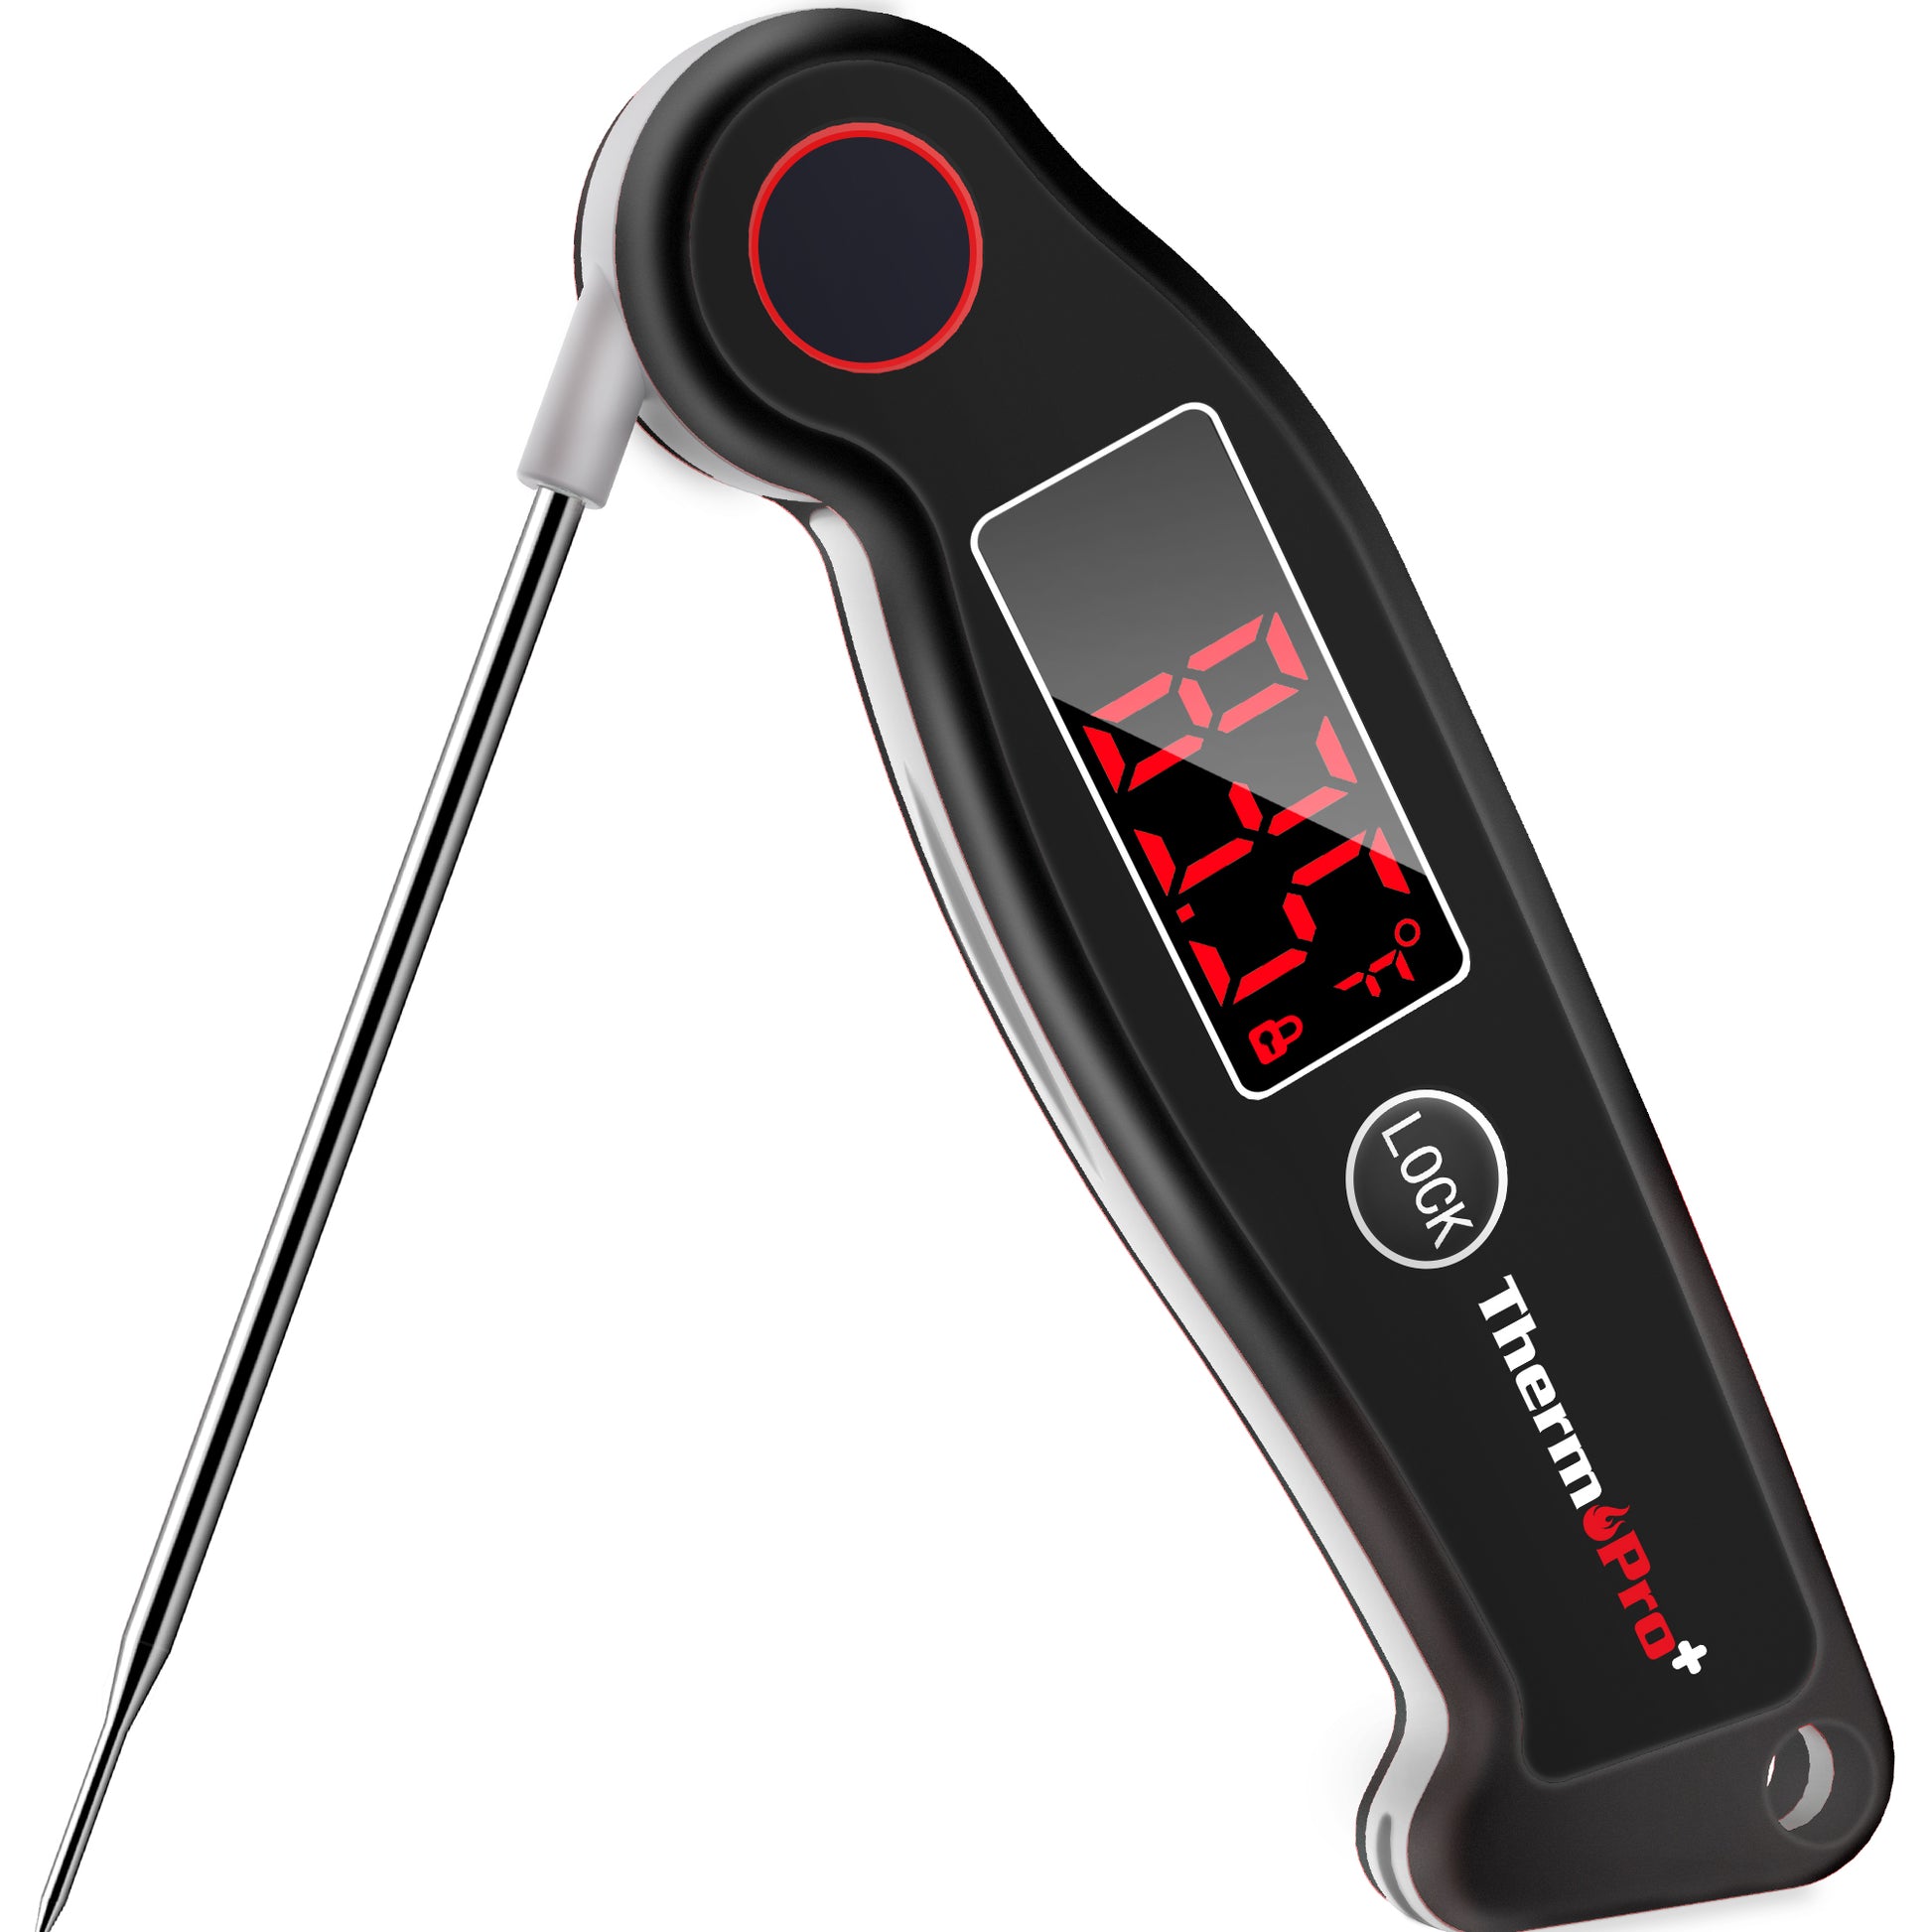 ThermoPro TP17W Digital Leave-in Meat Thermometer in the Meat Thermometers  department at